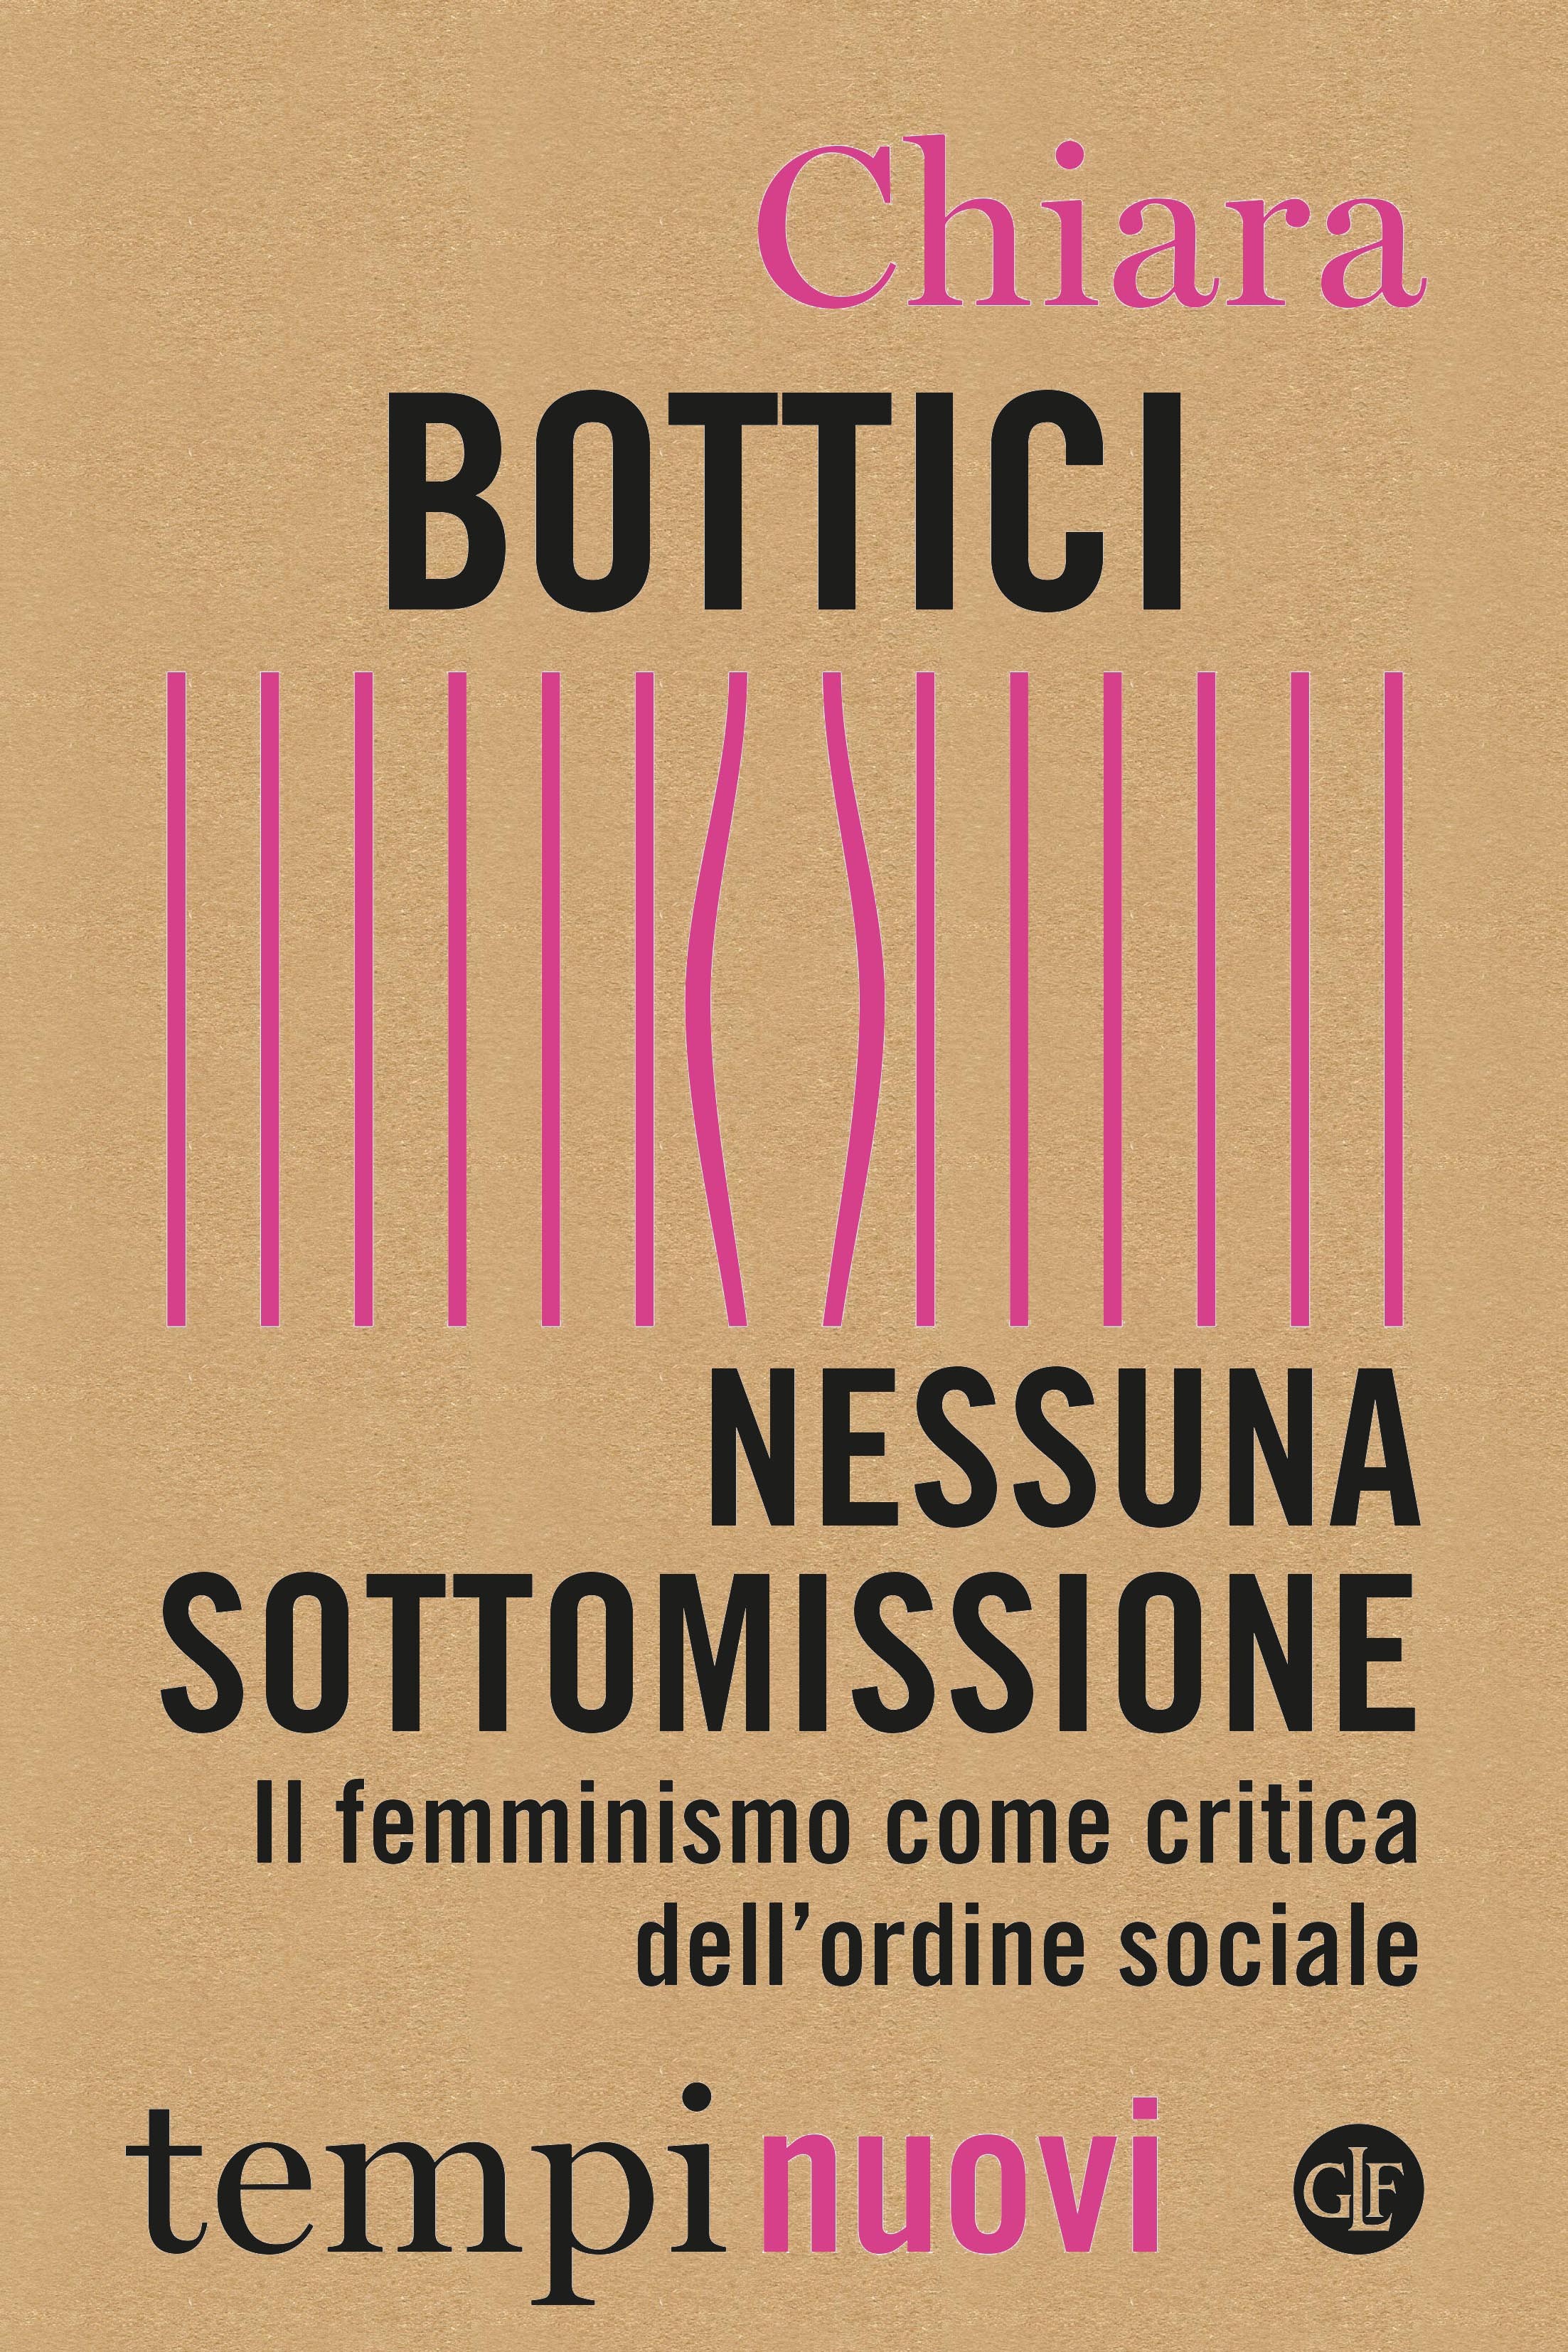 Nessuna sottomissione - Librerie.coop